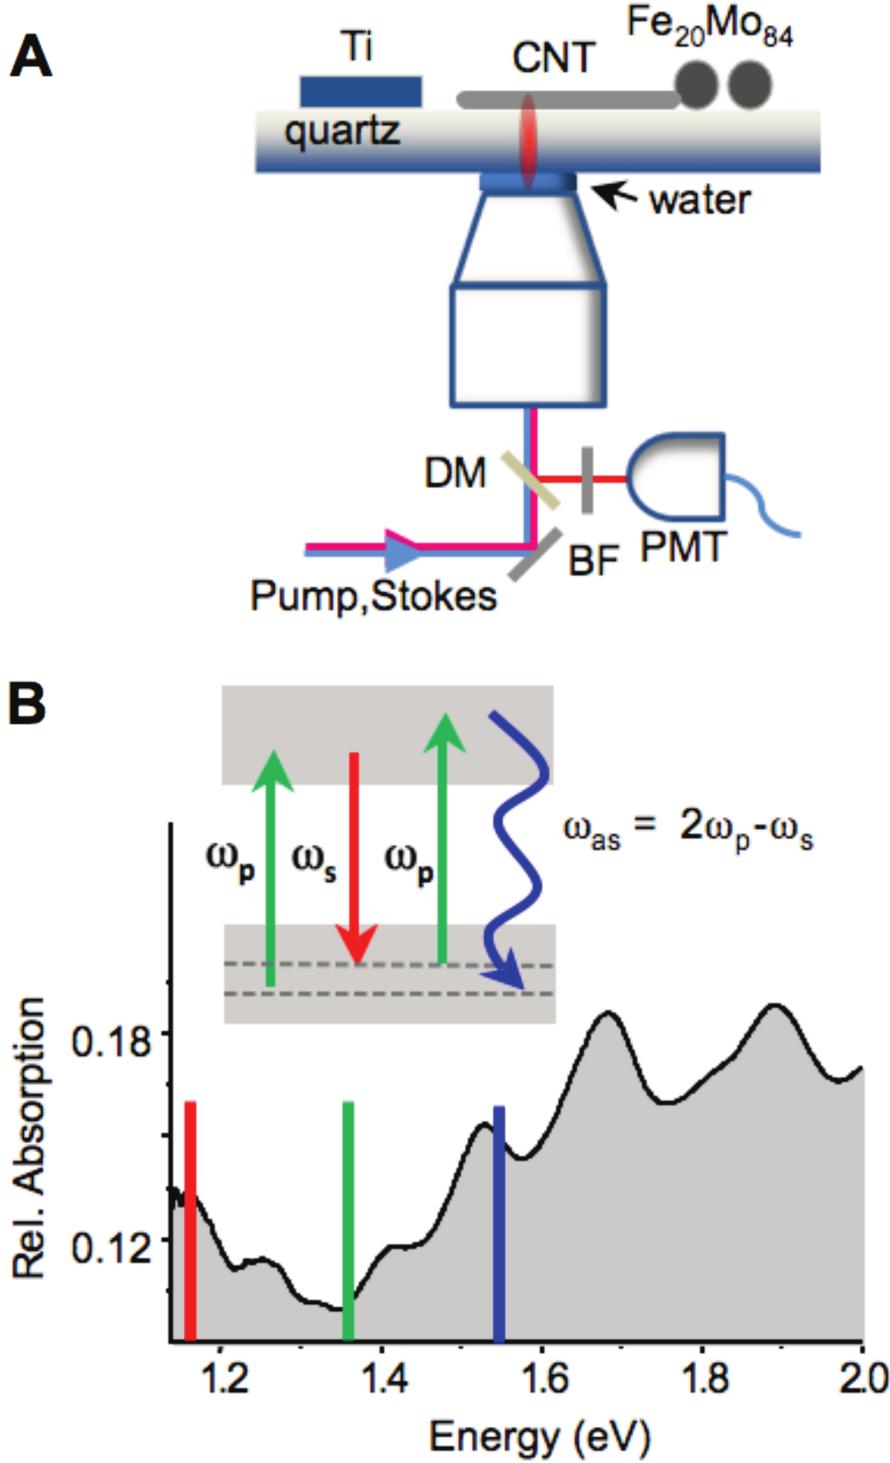 Figure 1. (A) Experimental setup: DM, dichroic mirror; BF, bandpass filter; PMT, photomultiplier tube. (B) Energy diagram for coherent anti-stokes scattering (CAS).